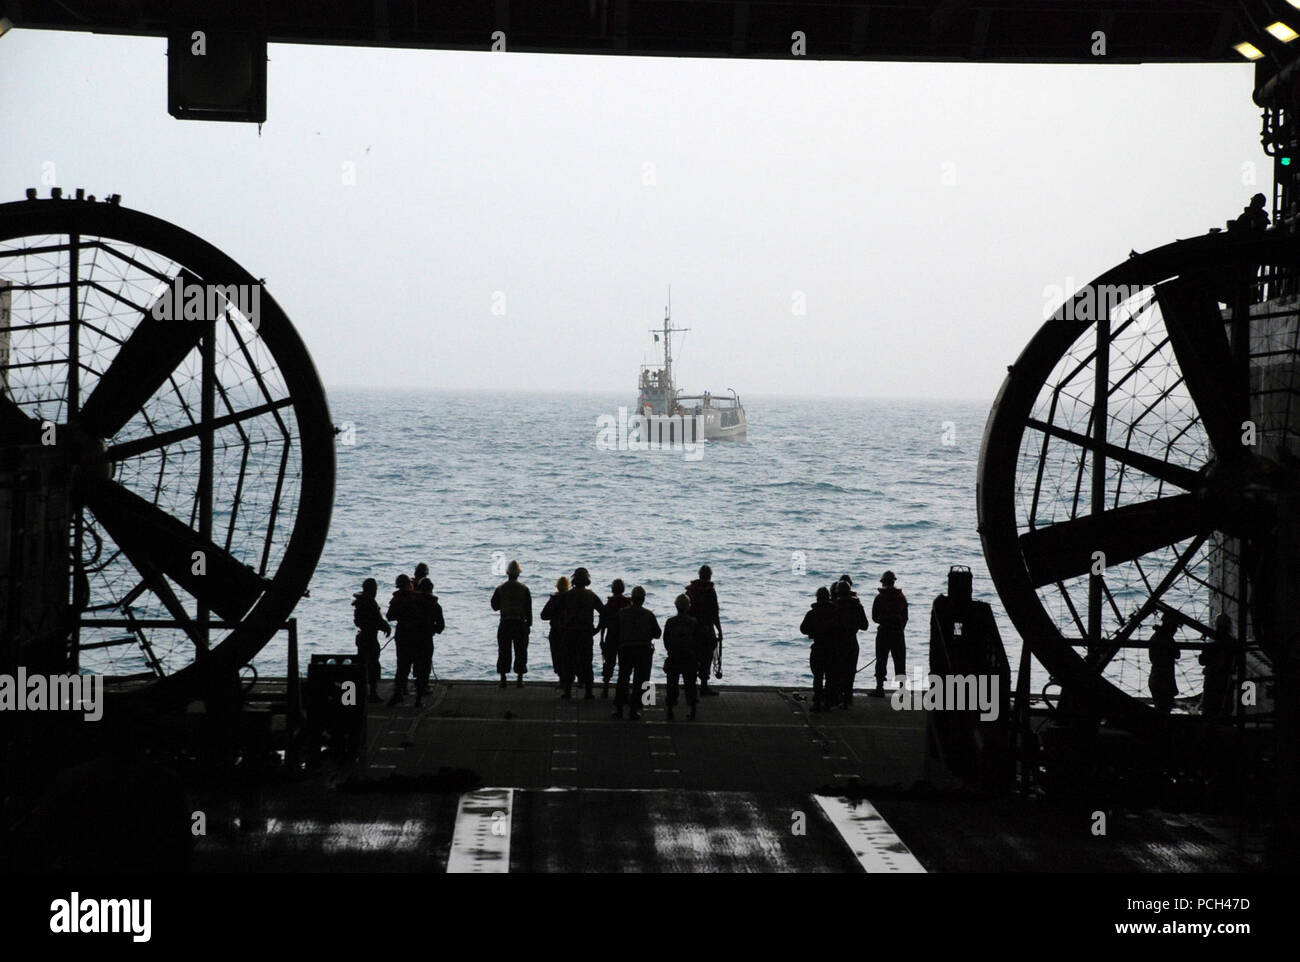 U.S. 5TH FLEET AREA OF RESPONSIBILITY (Jan. 8, 2013) Sailors wait to perform a stern gate marriage with a utility landing craft in the well deck of the amphibious transport dock ship USS Green Bay (LPD 20). Green Bay is part of the Peleliu Amphibious Ready Group, with the embarked 15th Marine Expeditionary Unit, deployed supporting maritime security operations and theater security cooperation efforts in the U.S. 5th Fleet area of responsibility. Stock Photo